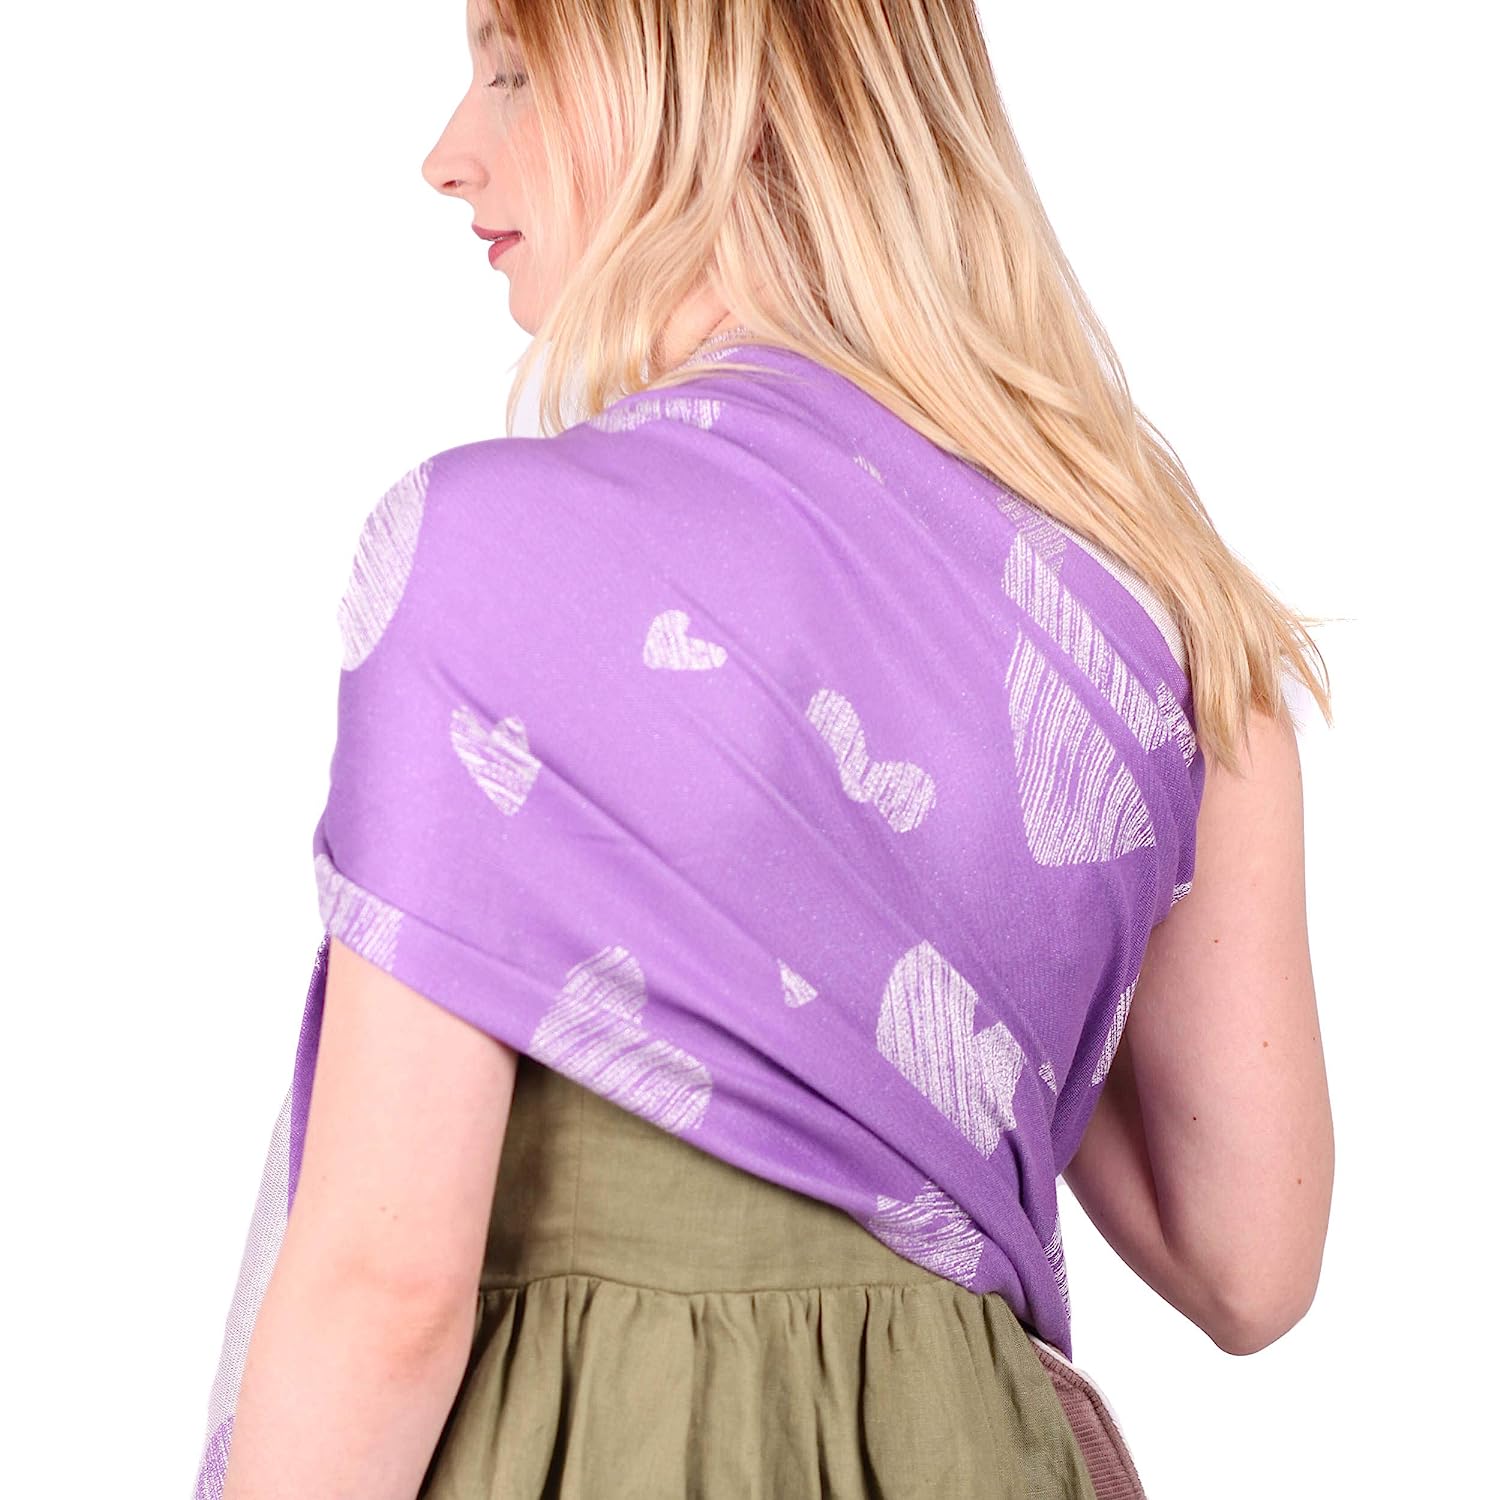 Schmusewolke Ring Sling Baby Sling Ruffled Jacquard Heartline Violet Shine Organic Cotton 80 x 215 cm Baby Size Toddler Size Baby and Toddler 9-60 Months 6-16 kg Hip Carrier